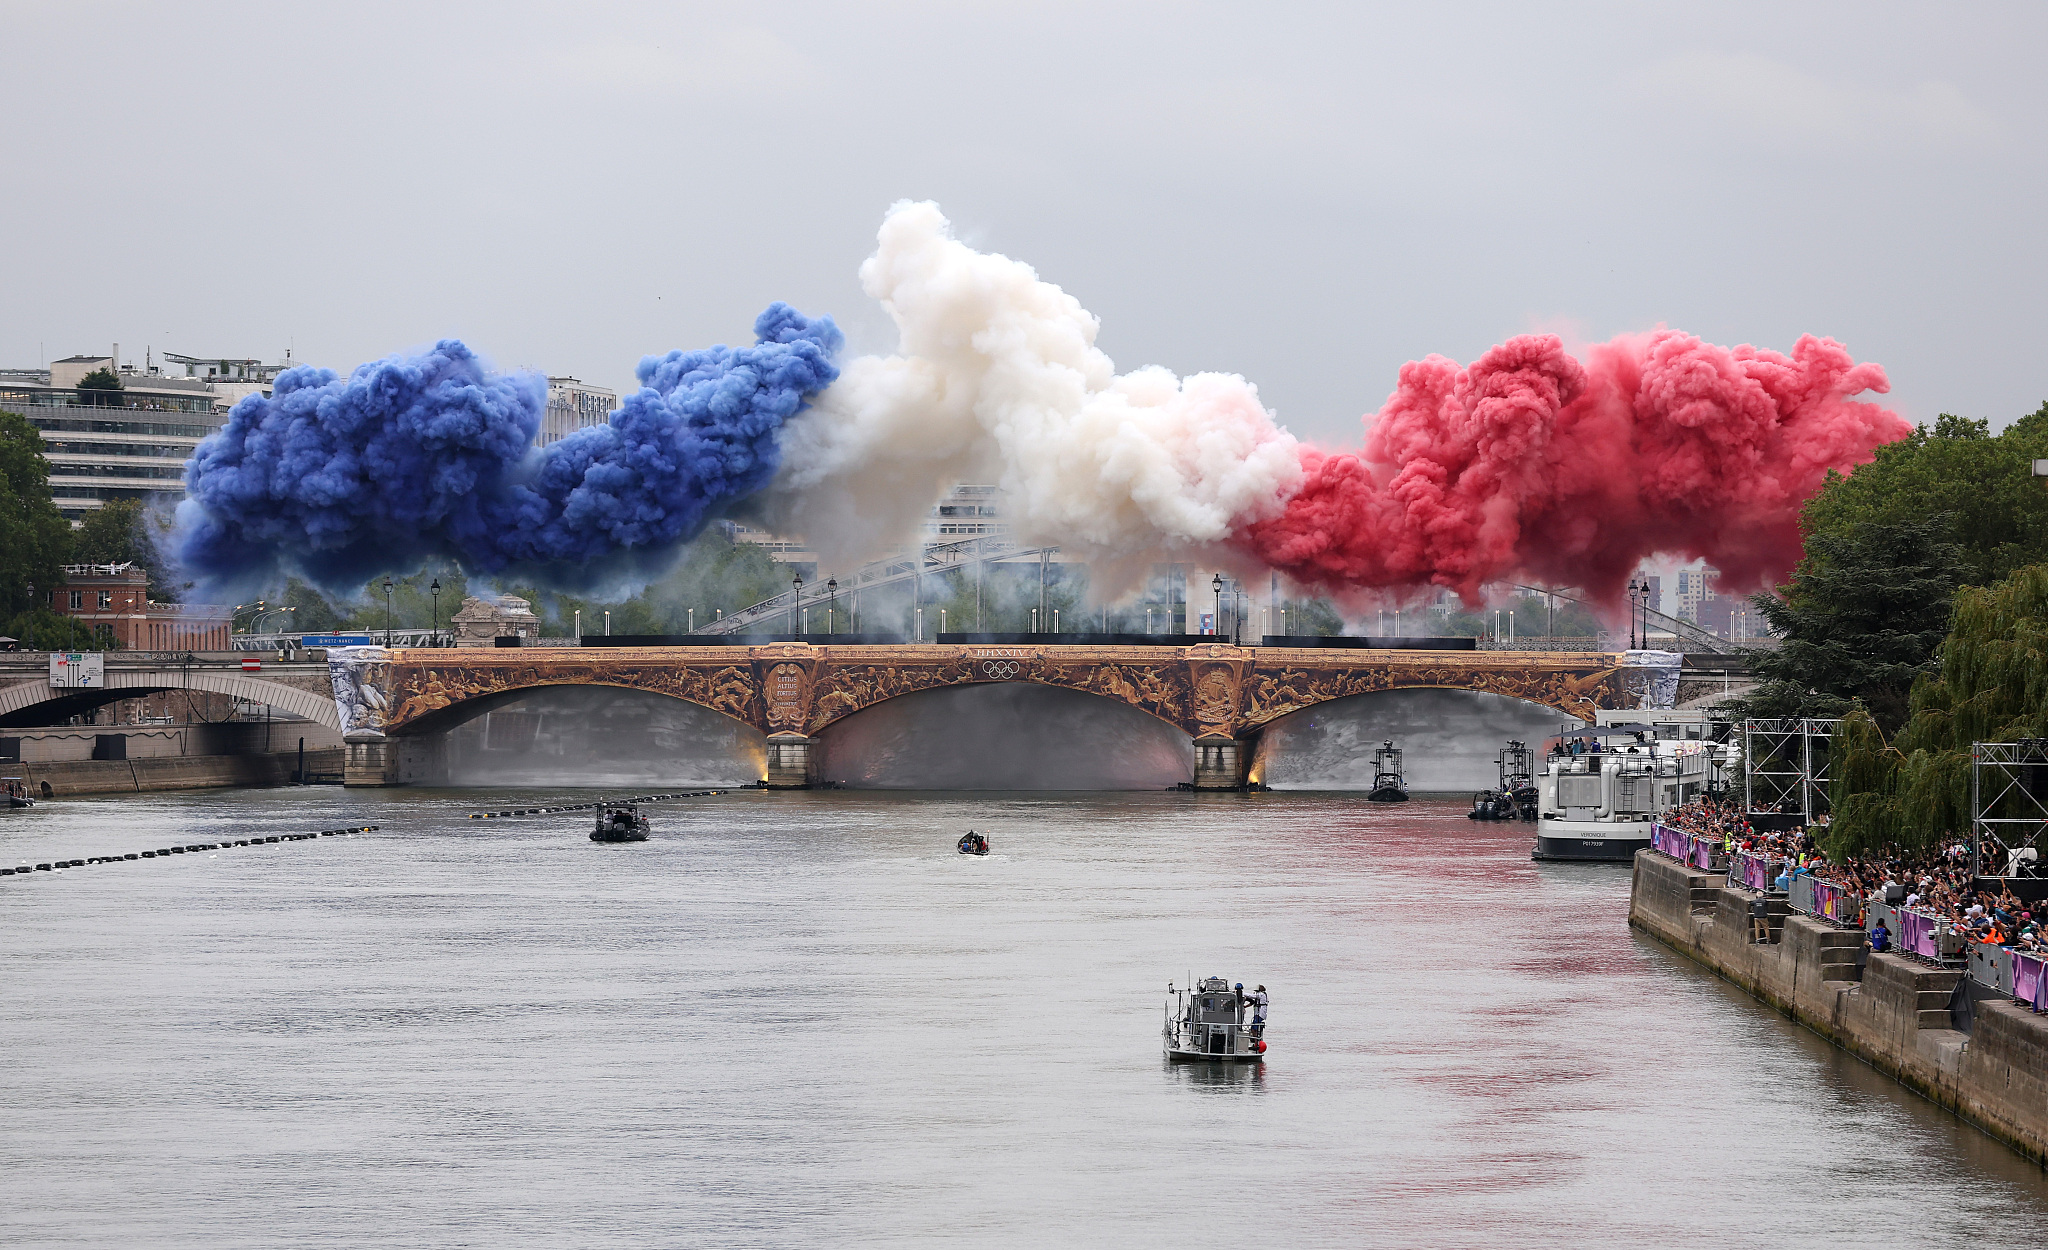 Smoke representing the colors of the French national flag is shown during the opening ceremony of the Paris 2024 Olympic Games in Paris, France, July 26, 2024. /CFP